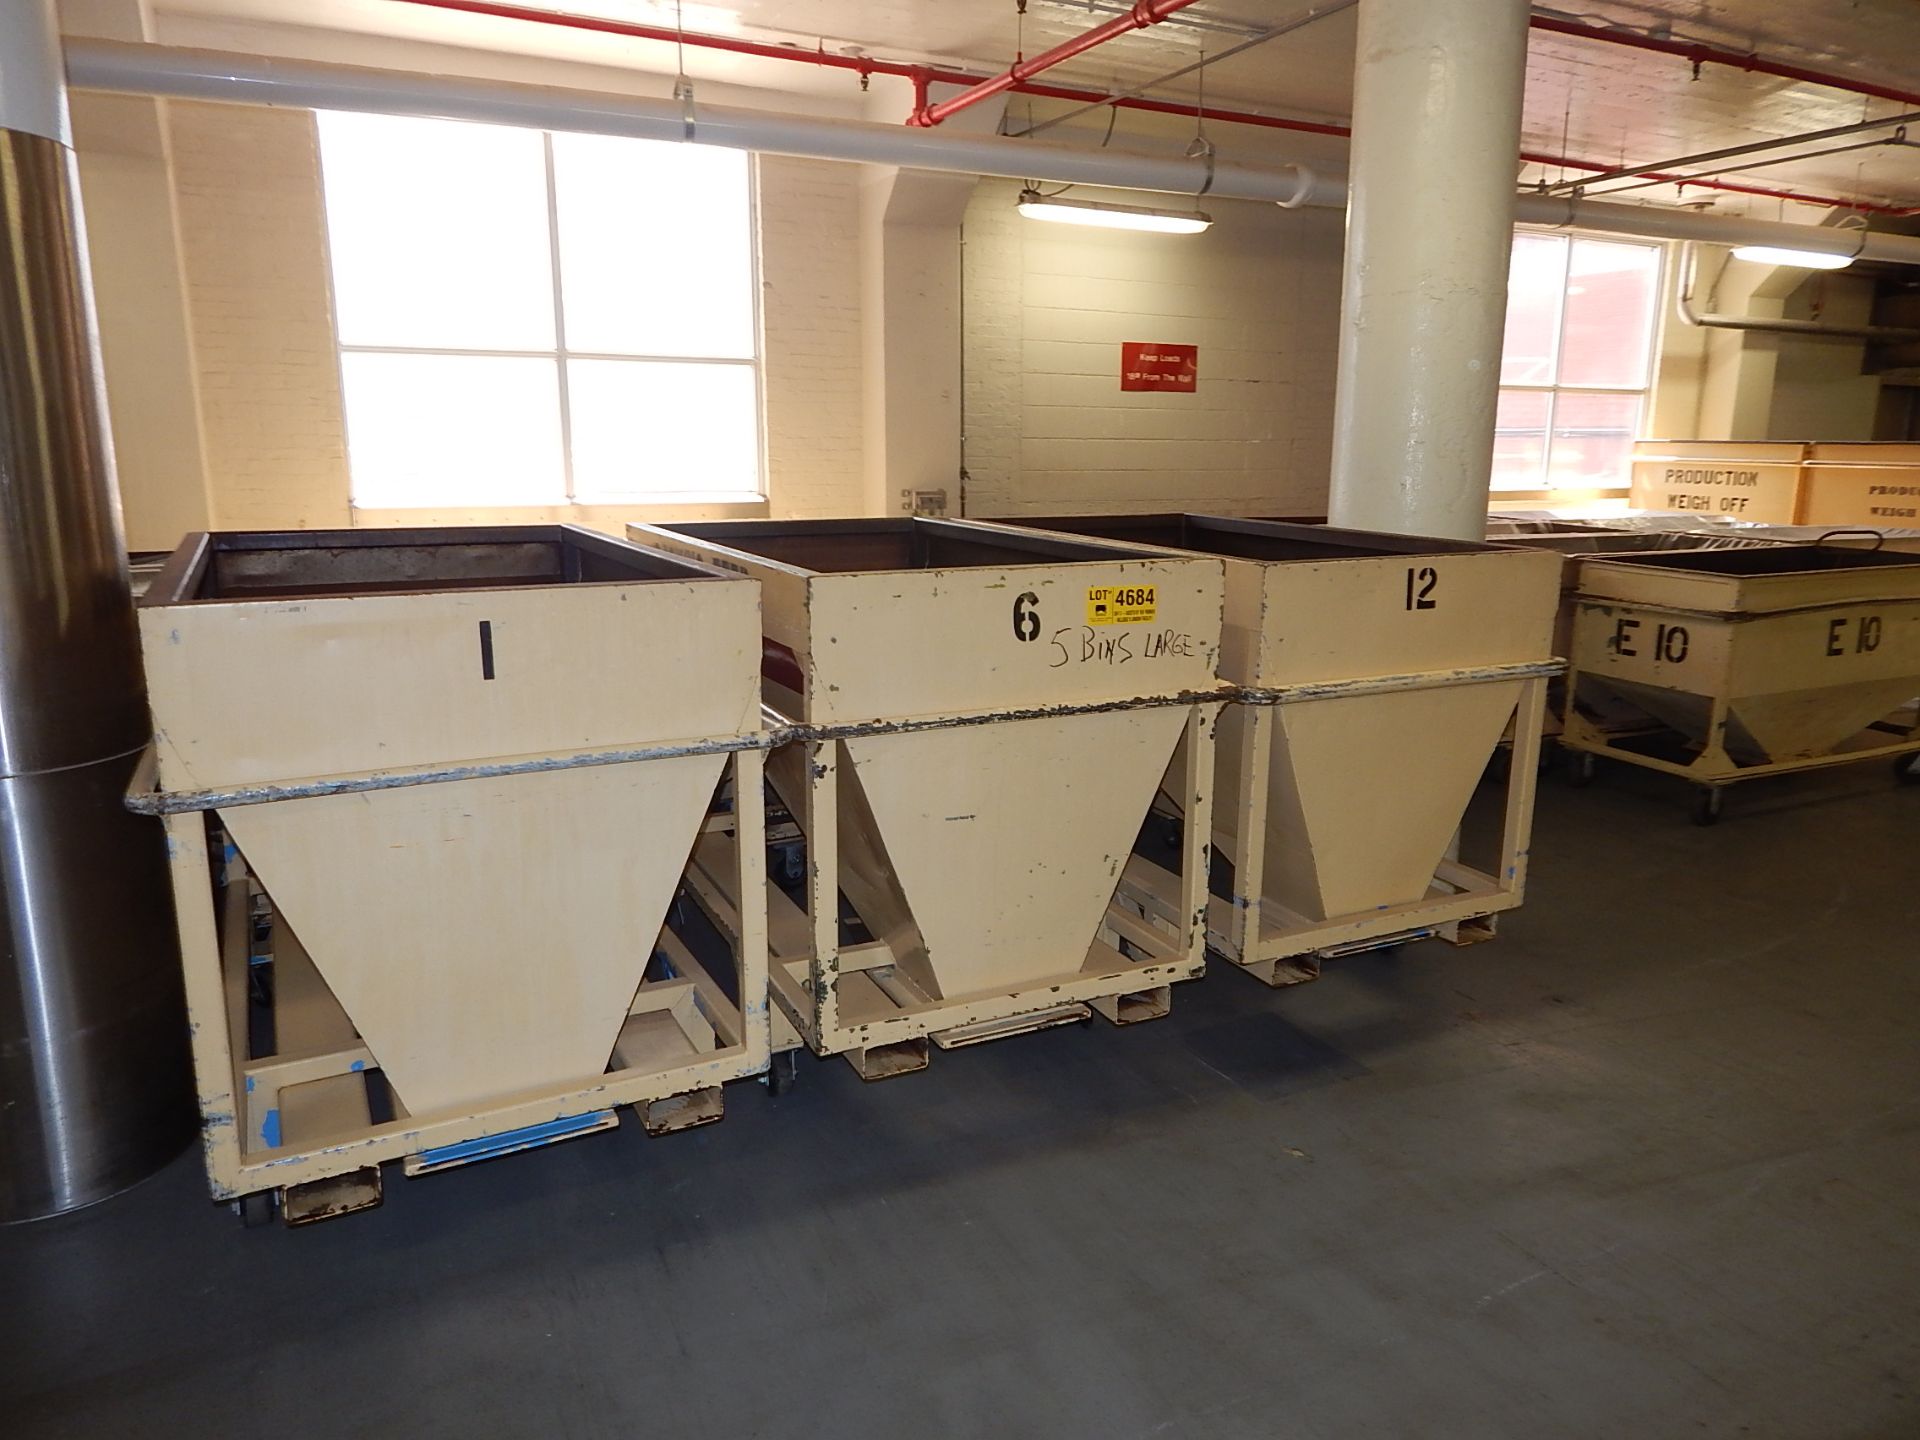 LARGE ROLLING HOPPER BINS WITH BOTTOM DISCHARGE (CI) (BUILDING 1A, 2)